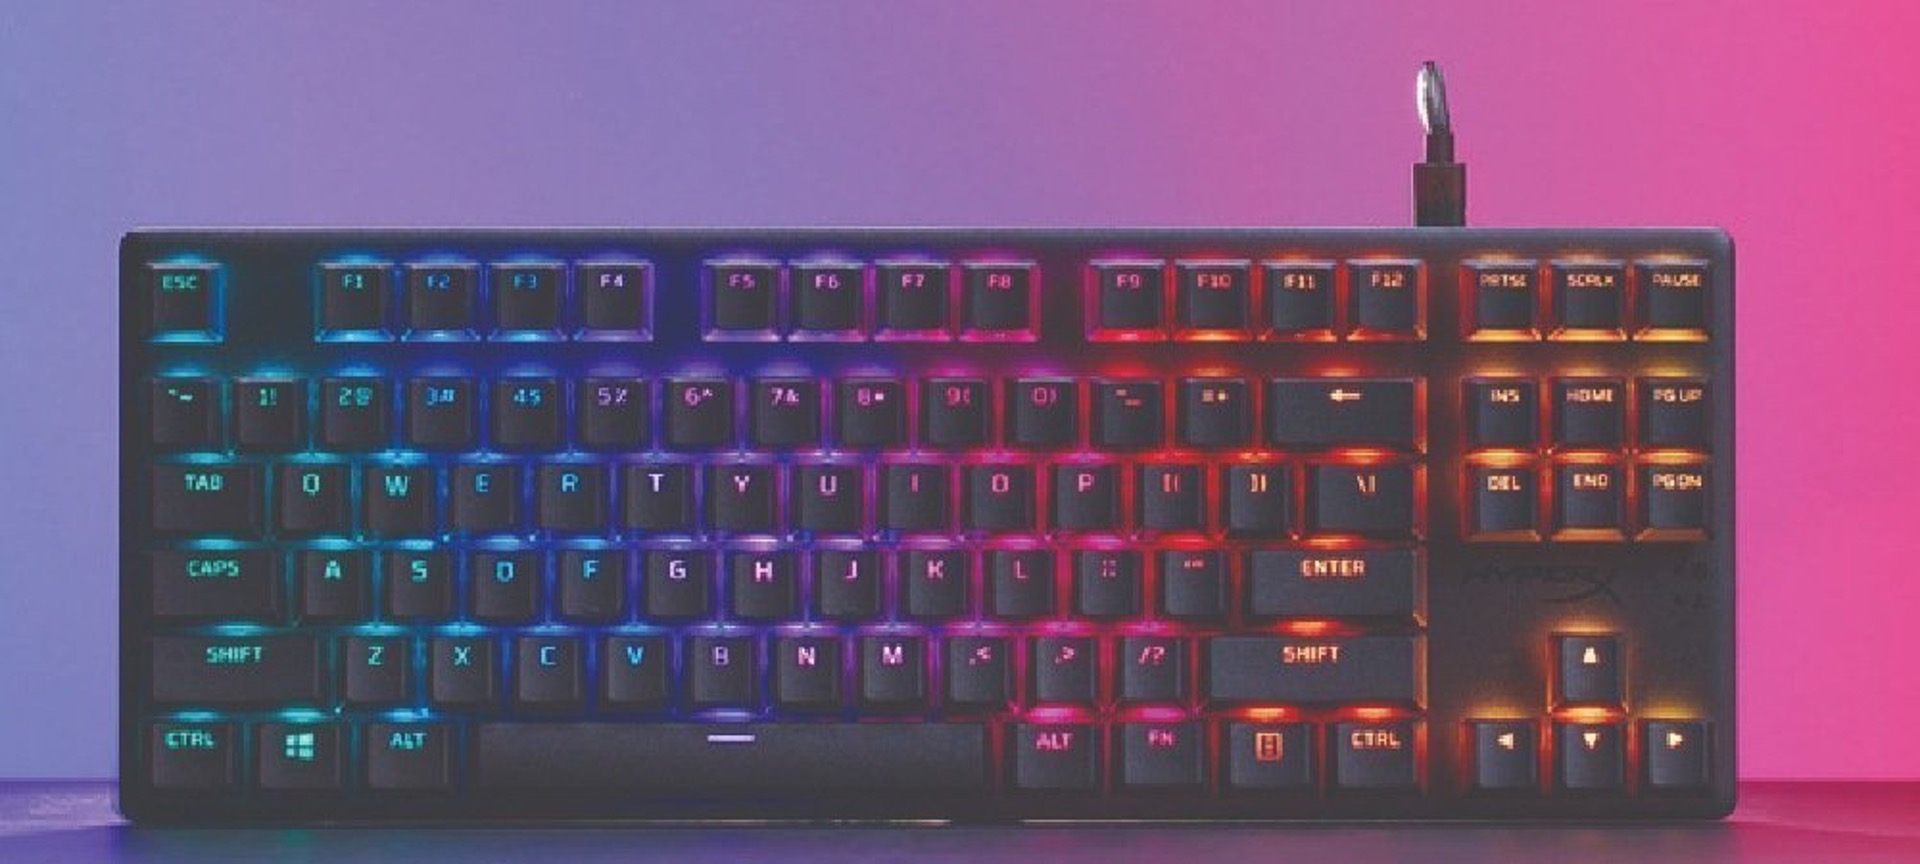 How To Program Extra Keys On A Gaming Keyboard